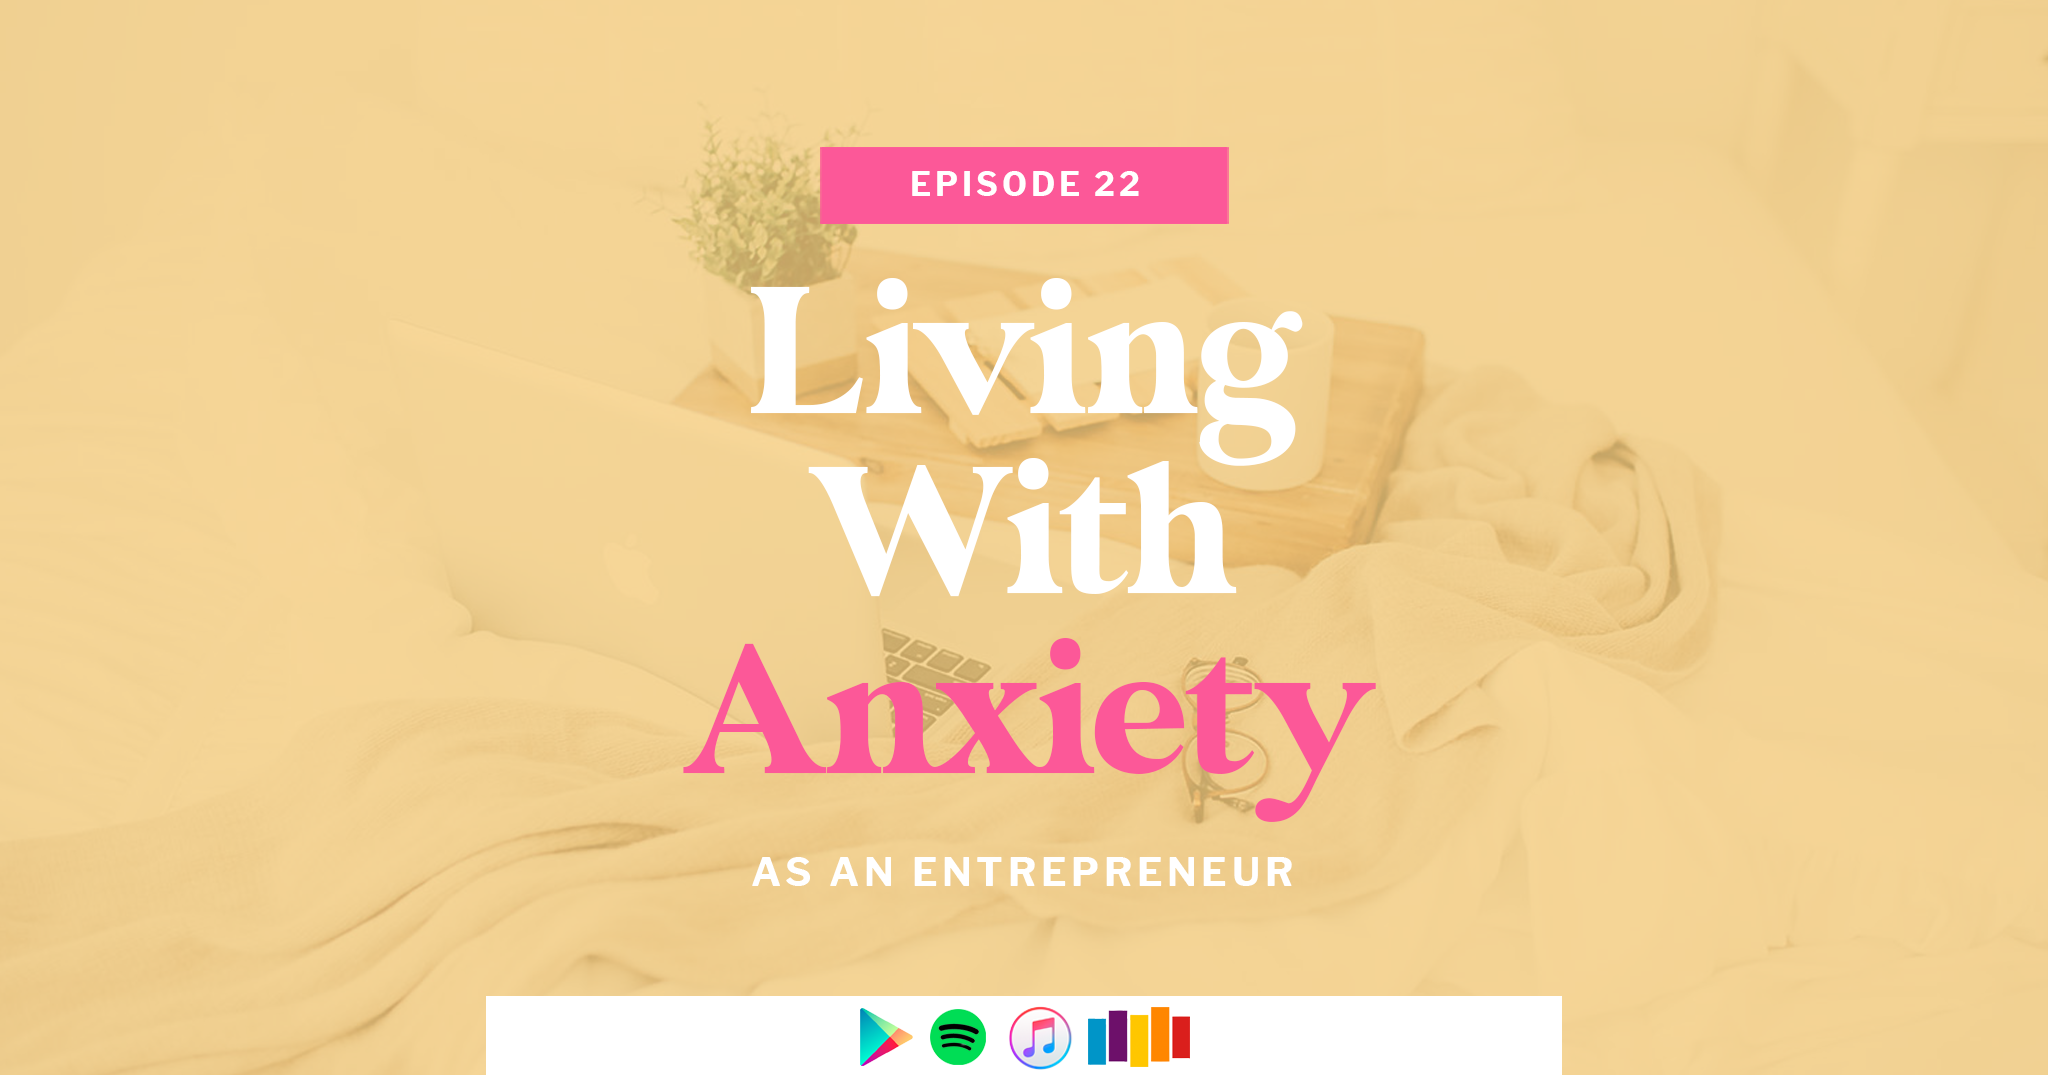 Living With Anxiety as an Entrepreneur